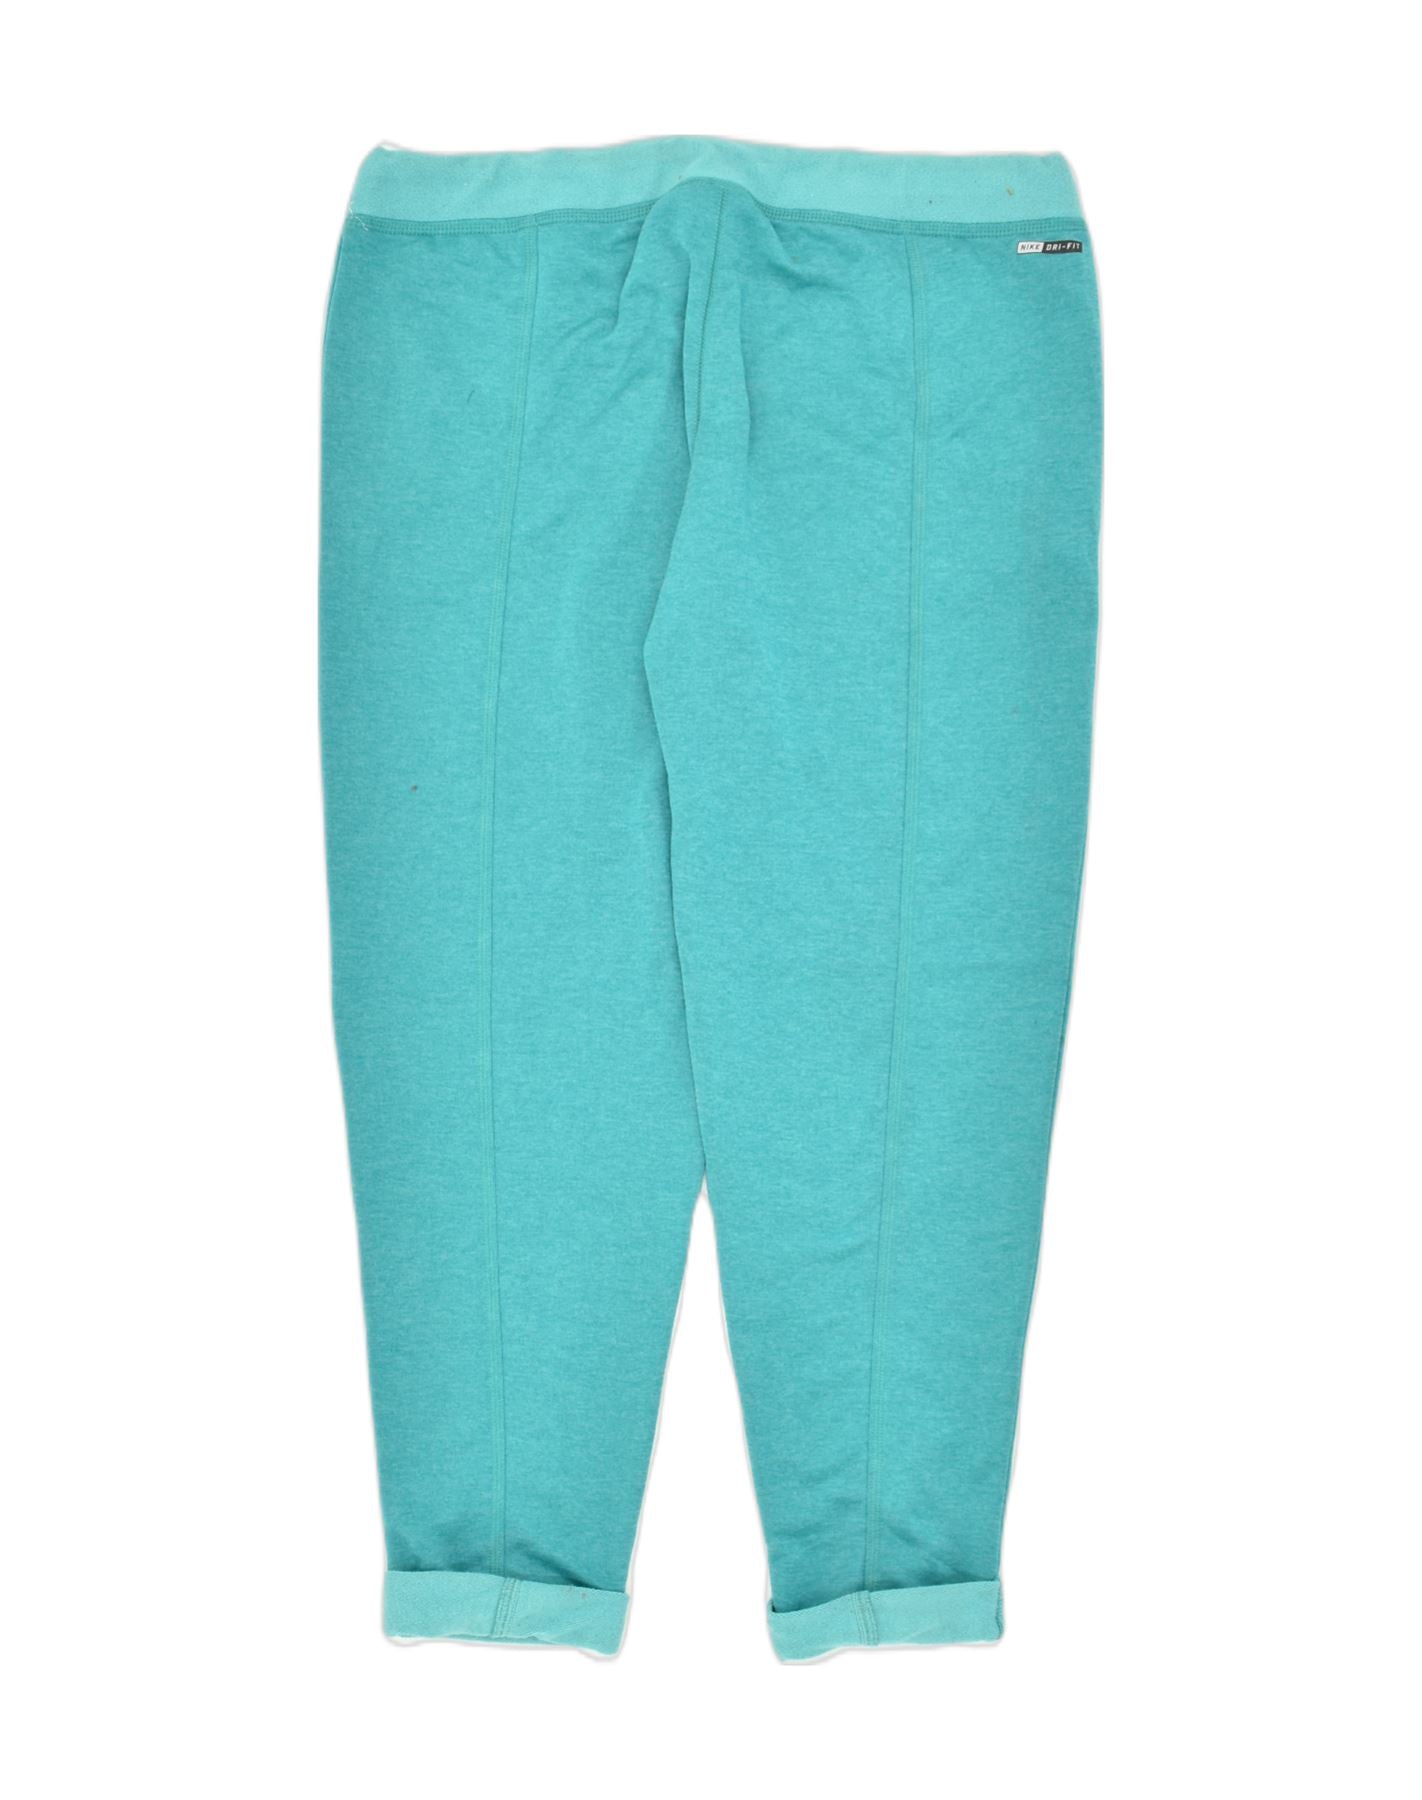 HURLEY Womens Nike Dri Fit Tracksuit Trousers UK 18 XL Turquoise